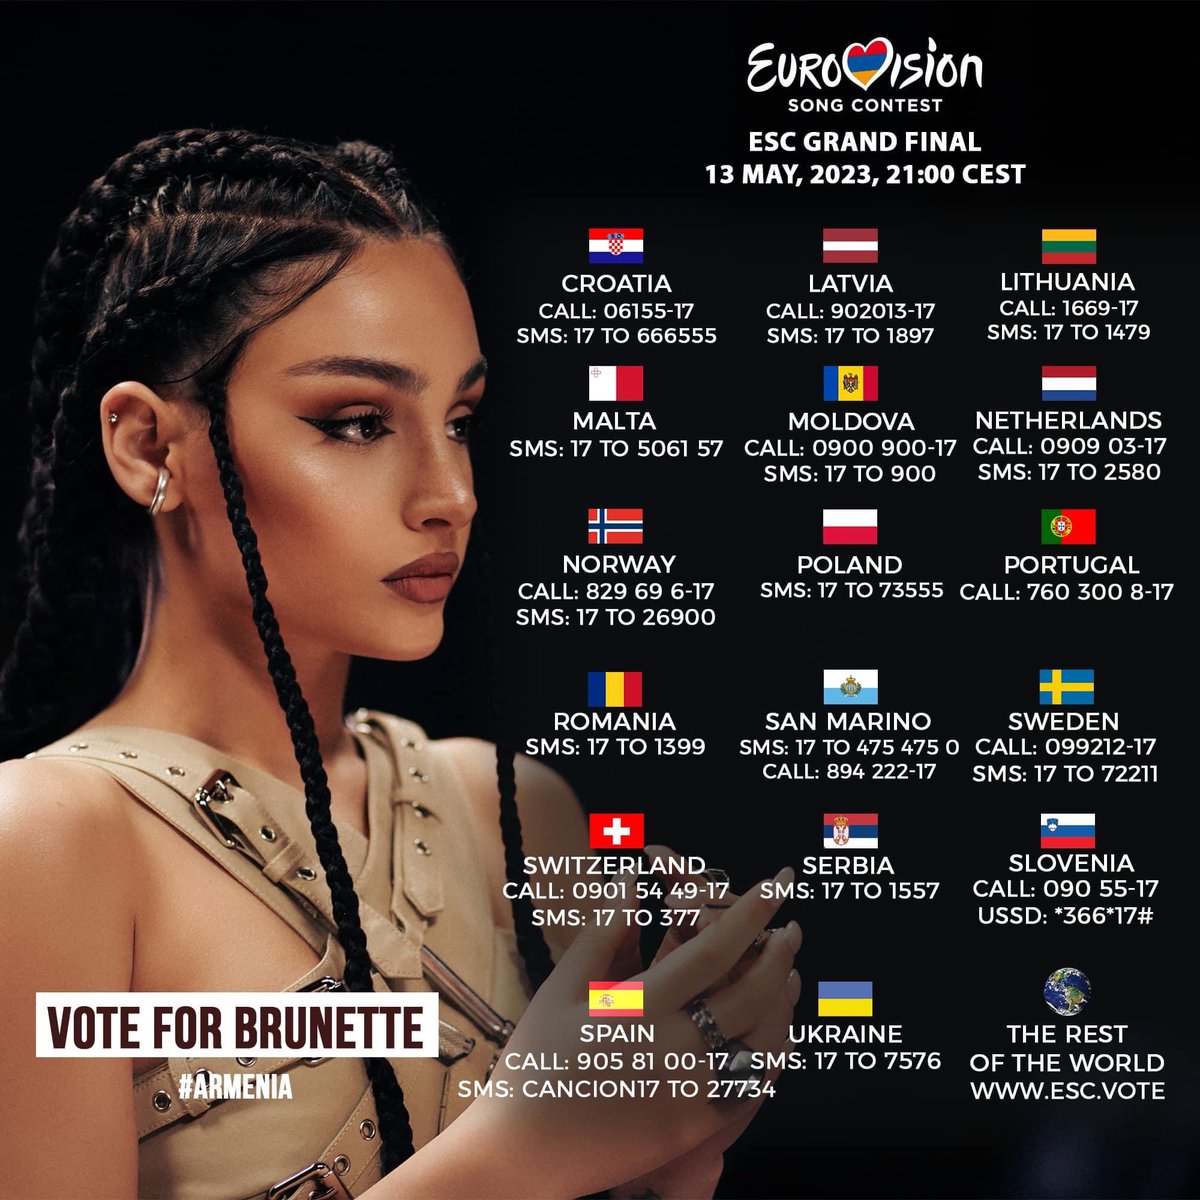 👋 Hello Europe. You can vote for Brunette by sending 17 to the following numbers. Watch Eurovision Song Contest’s Grand Final LIVE via your Public Broadcaster for more detailed information on voting.